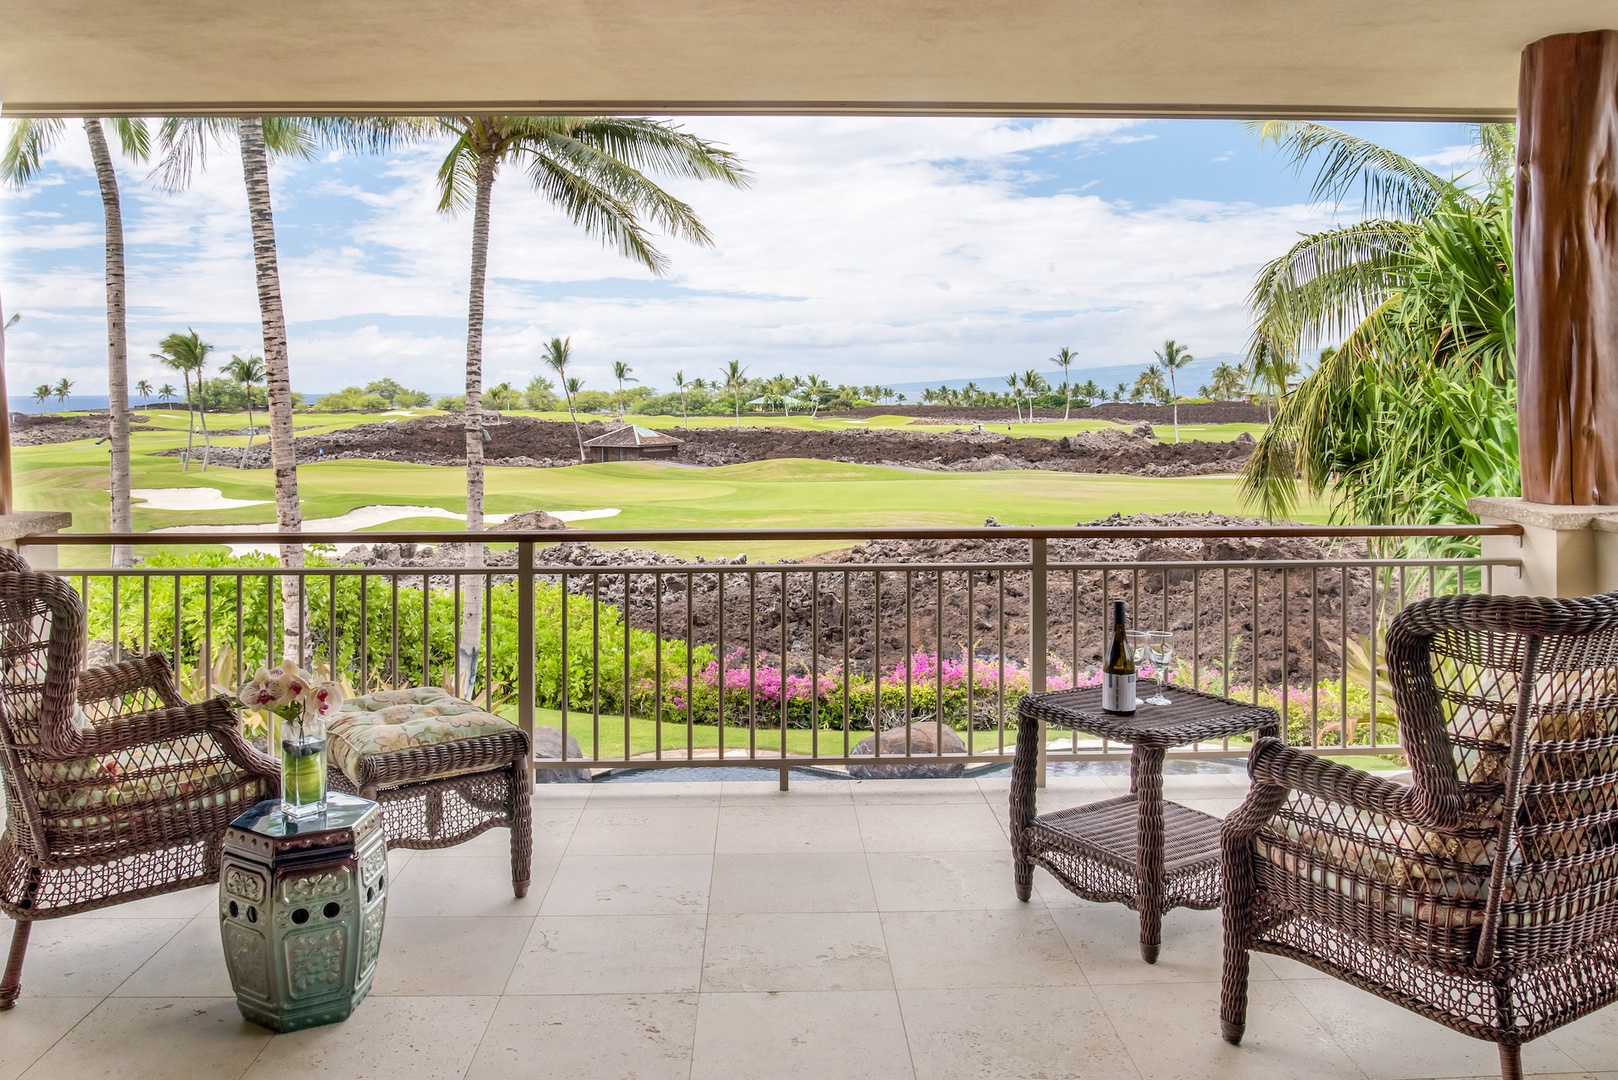 Kamuela Vacation Rentals, 3BD OneOcean (1C) at Mauna Lani Resort - Private Lanai Off Primary w/ Comfortable Seating, a Perfect Place to Relax at the Beginning or End of Each Perfect Day.